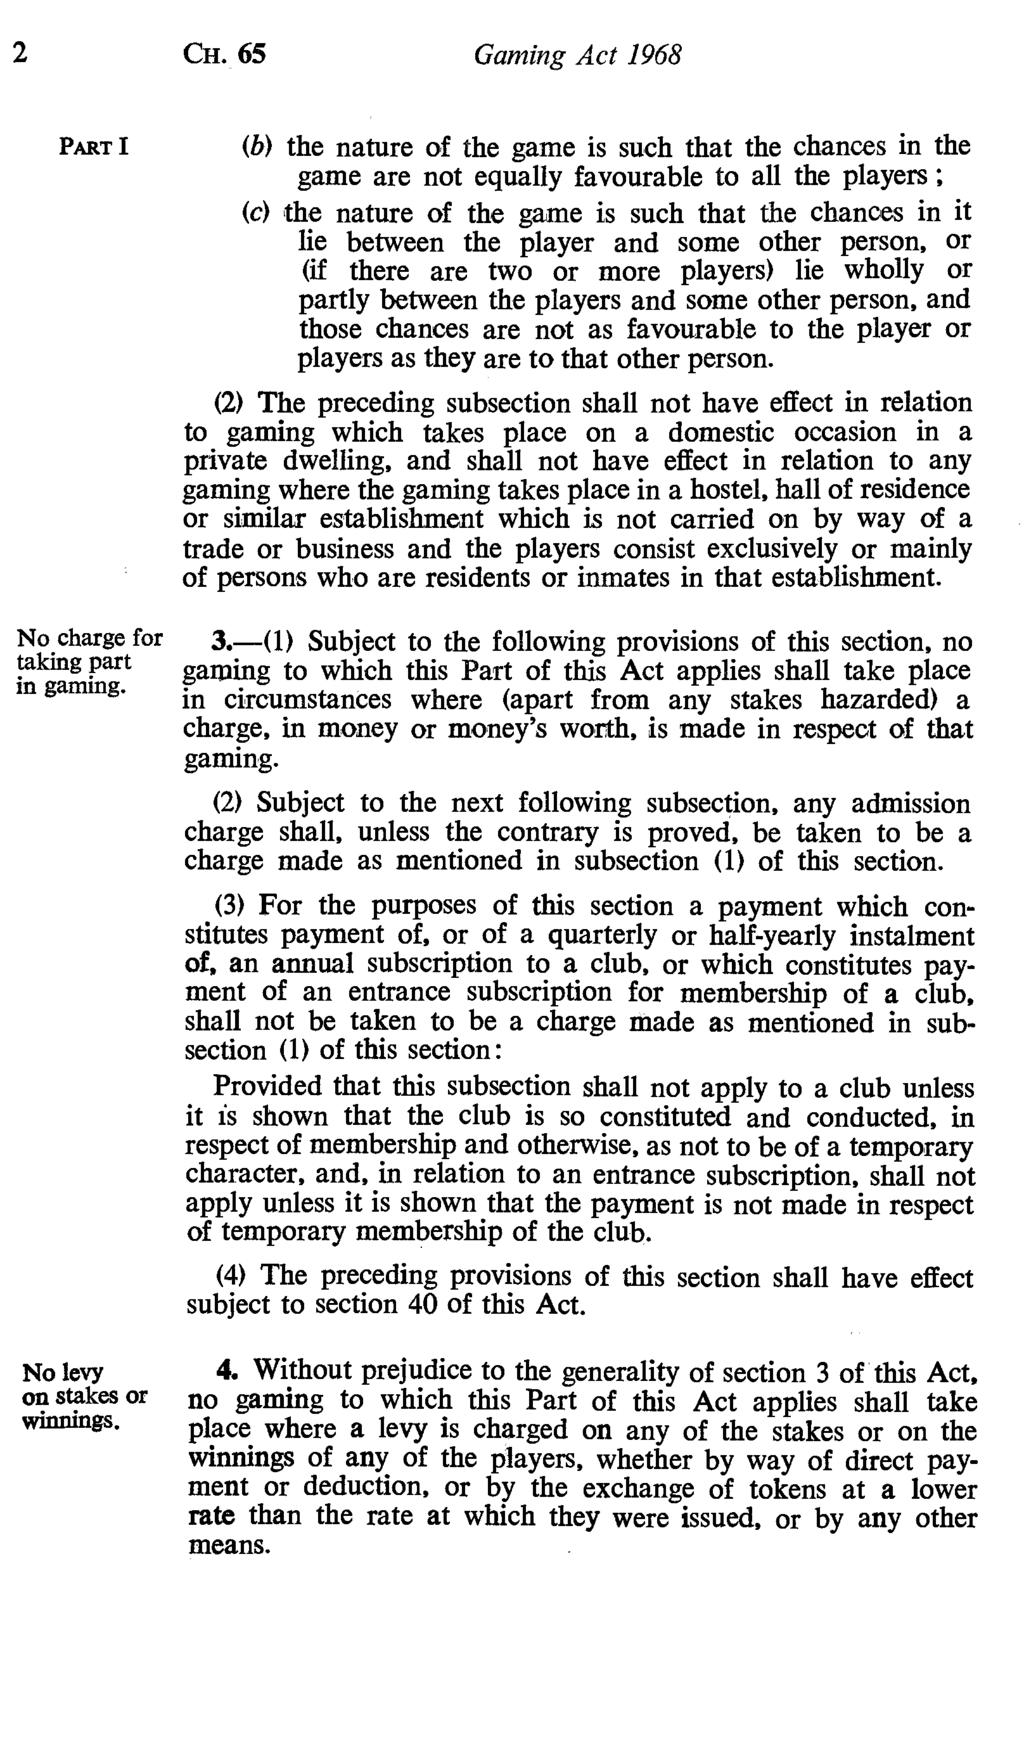 2 CH. 65 Gaming Act 1968 PART I No charge for taking part in gaming. No levy on stakes or winnings.